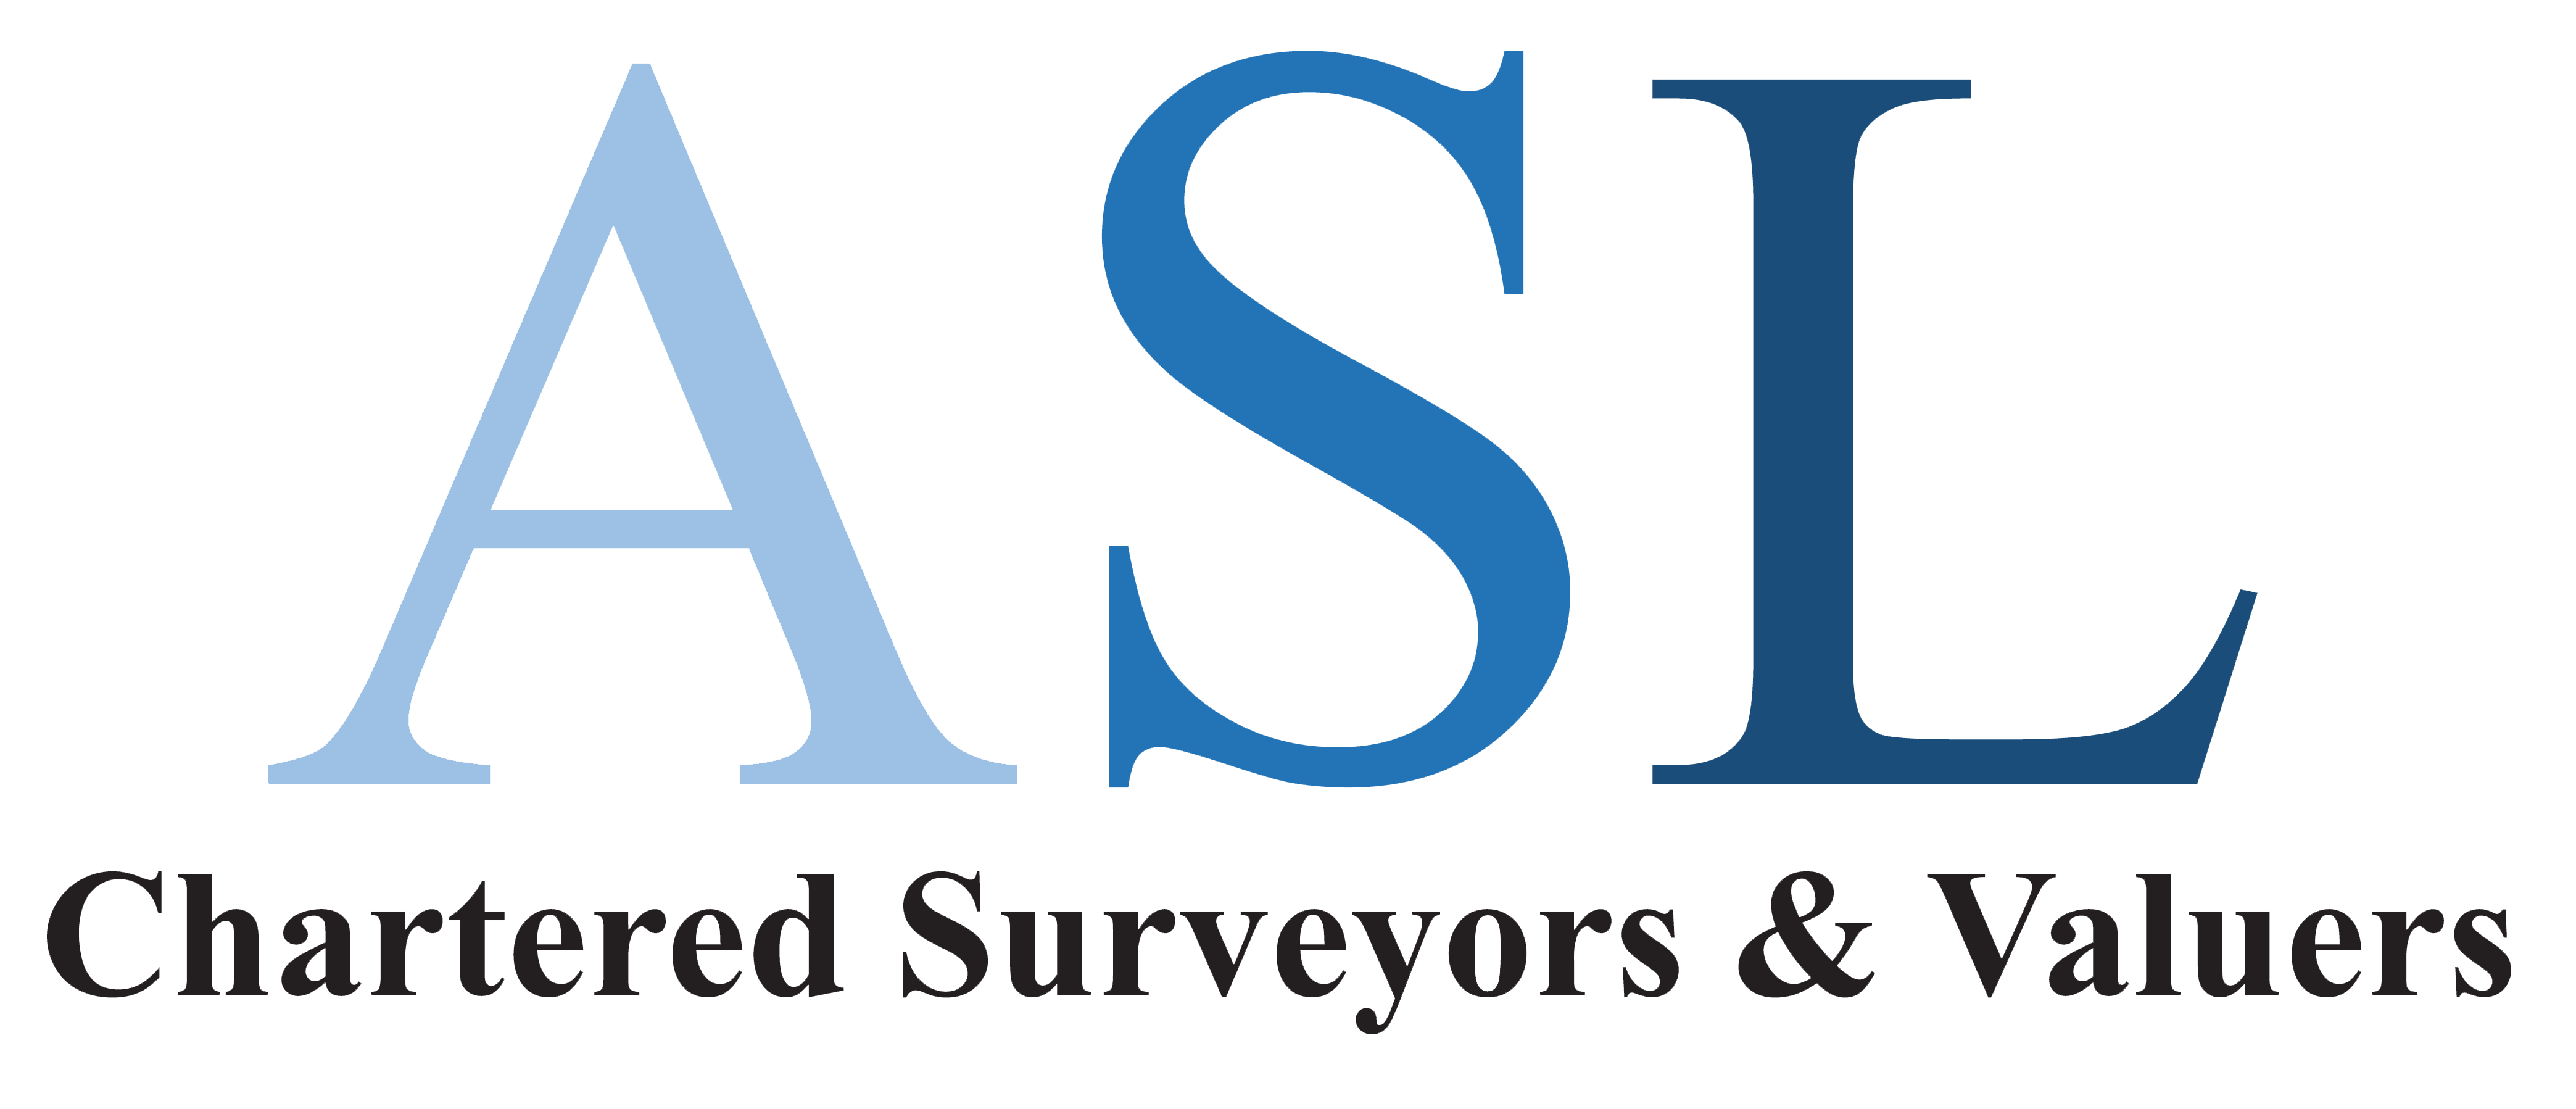 ASL,Ashall,ASL Chartered Surveyors,Chartered,Surveyors,Chartered Surveyors,Survey,Surveys,Assessment,Lease,Renewal,Lease Renewals,Reviews,Consultancy,Dilapidation,Rent,Landlords,Landlord,Tenants